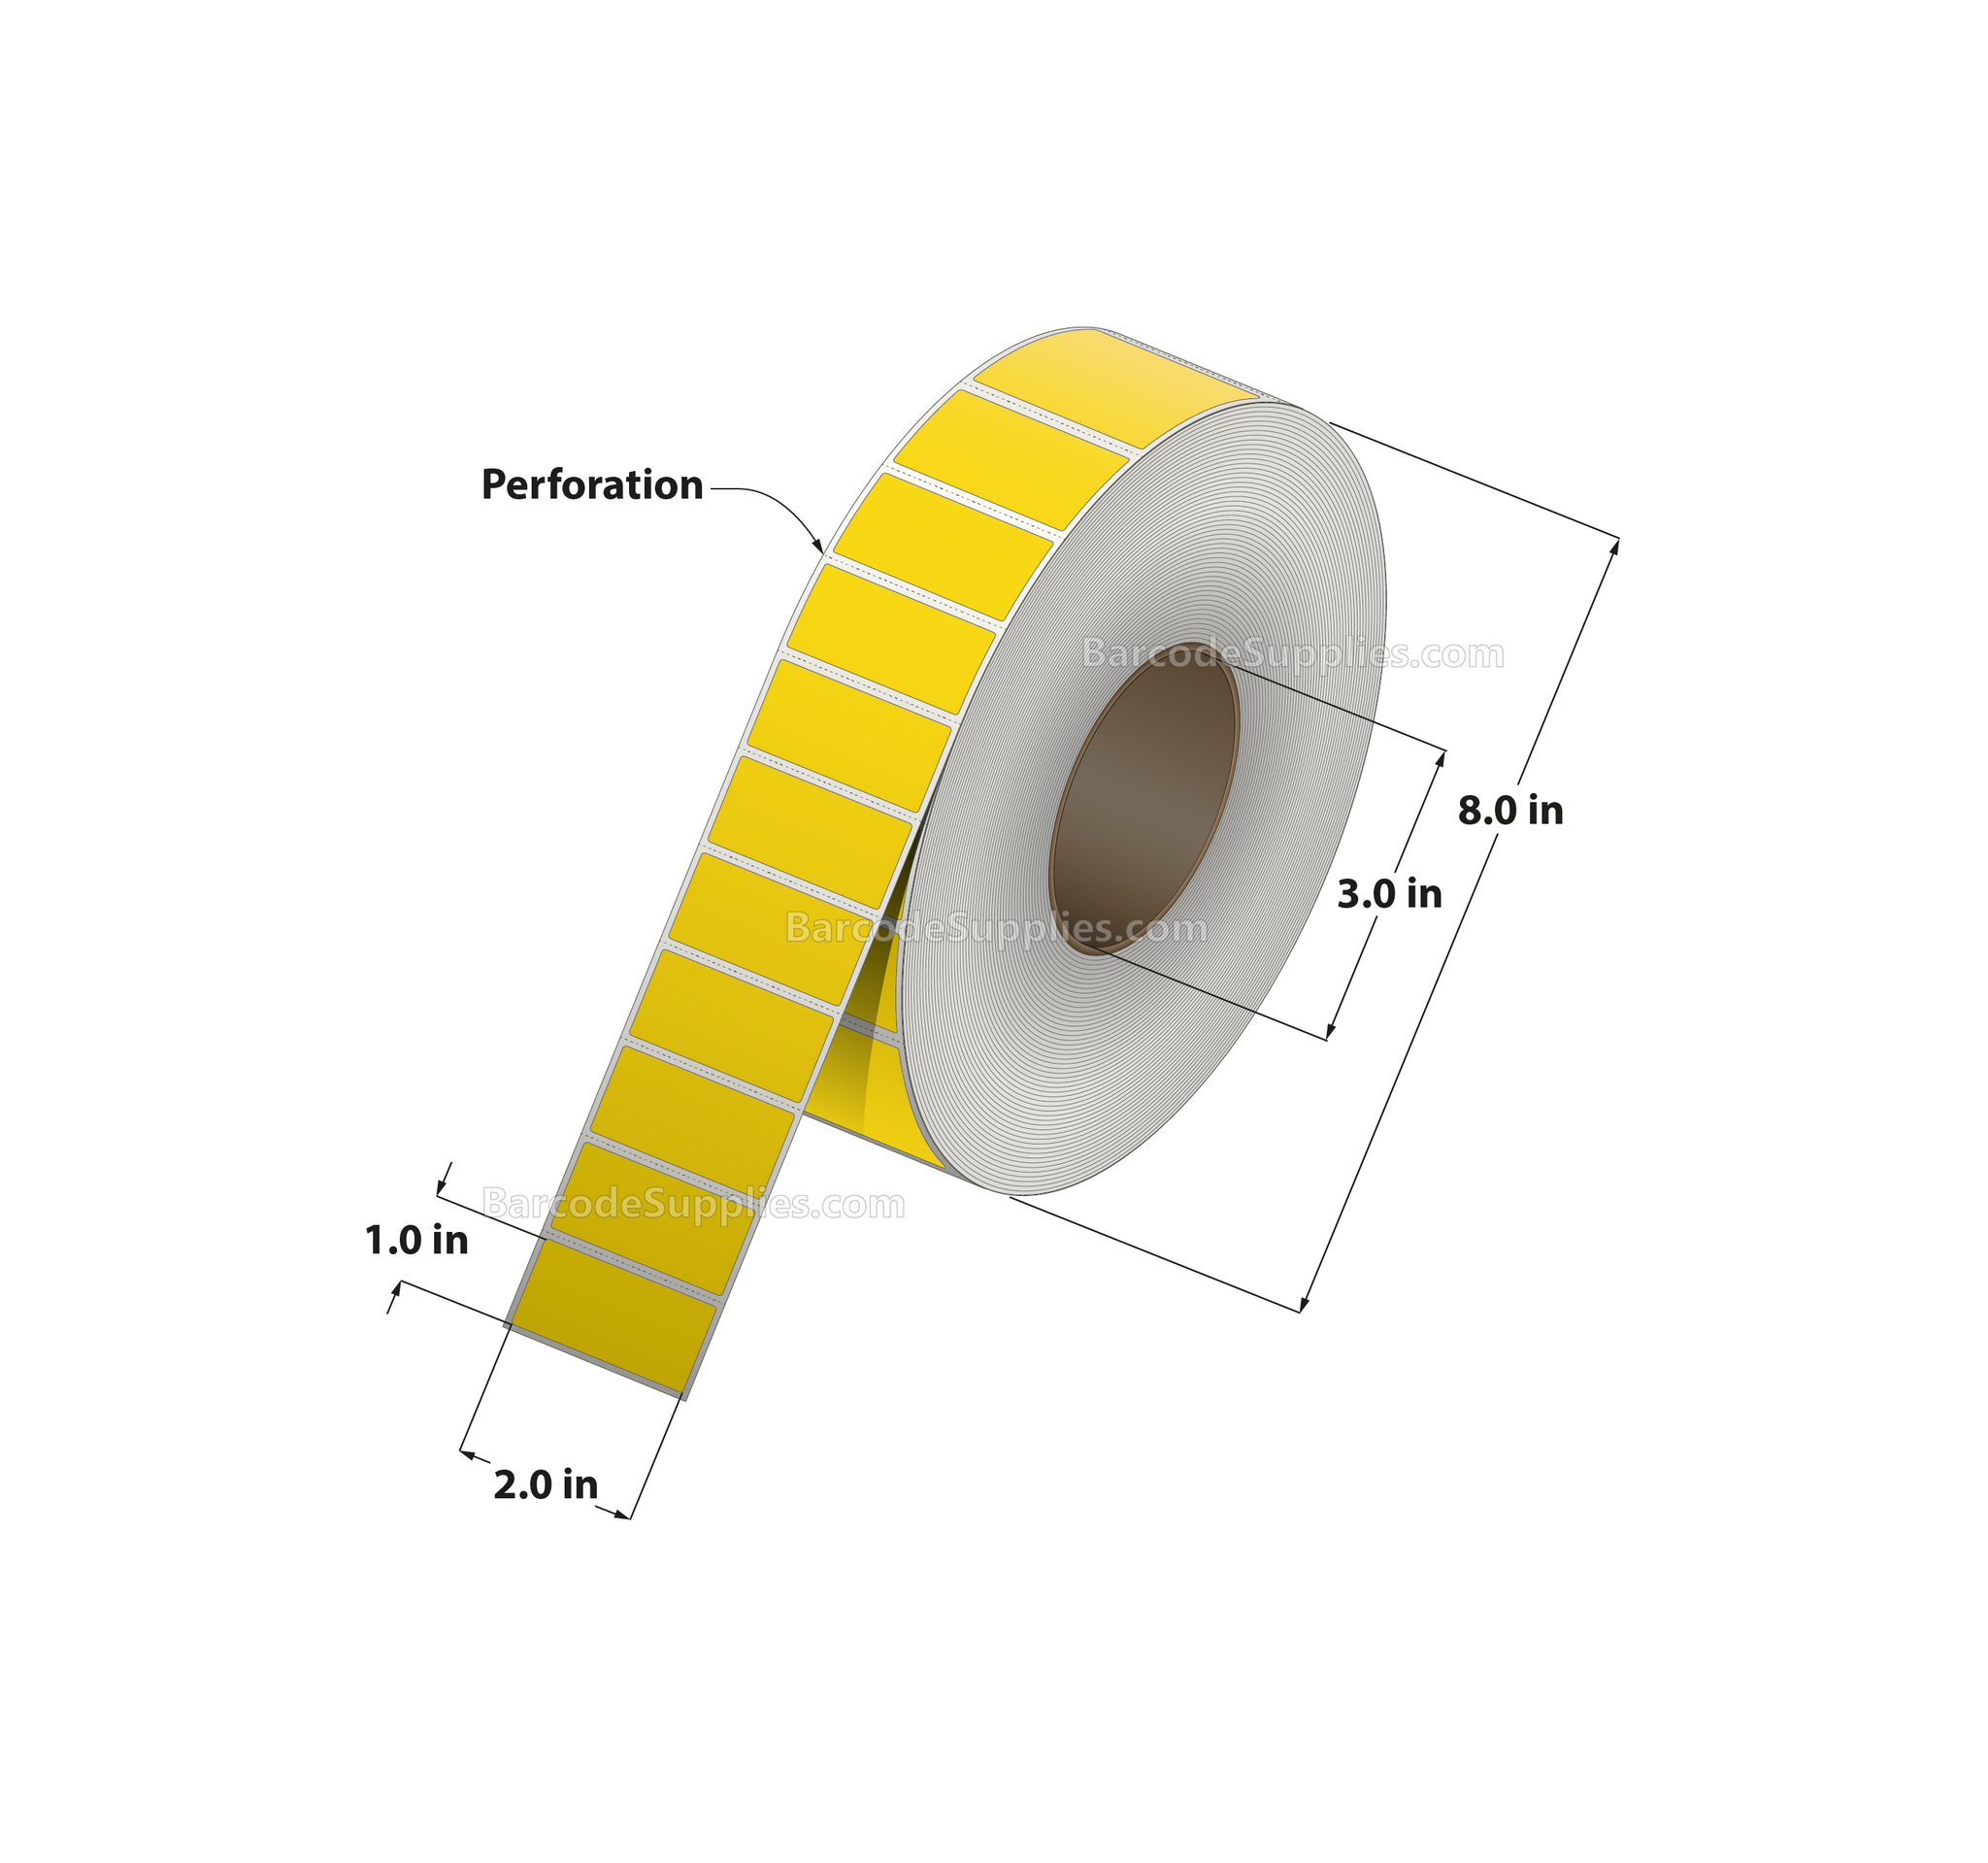 2 x 1 Thermal Transfer Pantone Yellow Labels With Permanent Adhesive - Perforated - 5500 Labels Per Roll - Carton Of 8 Rolls - 44000 Labels Total - MPN: RFC-2-1-5500-YL